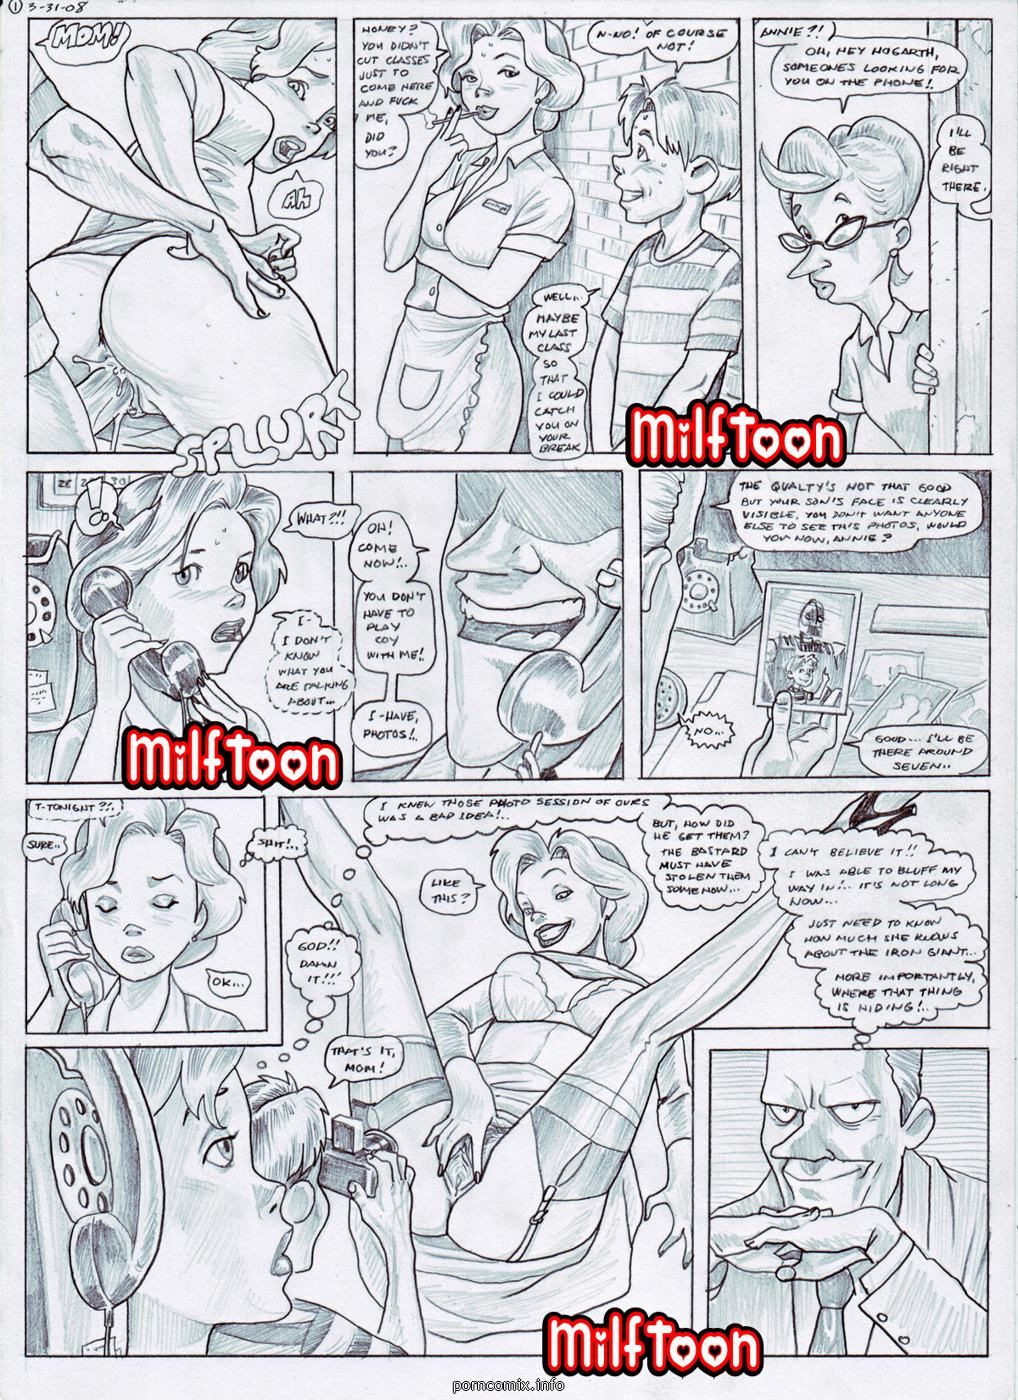 Milftoon - Iron Giant 2, Incest page 2